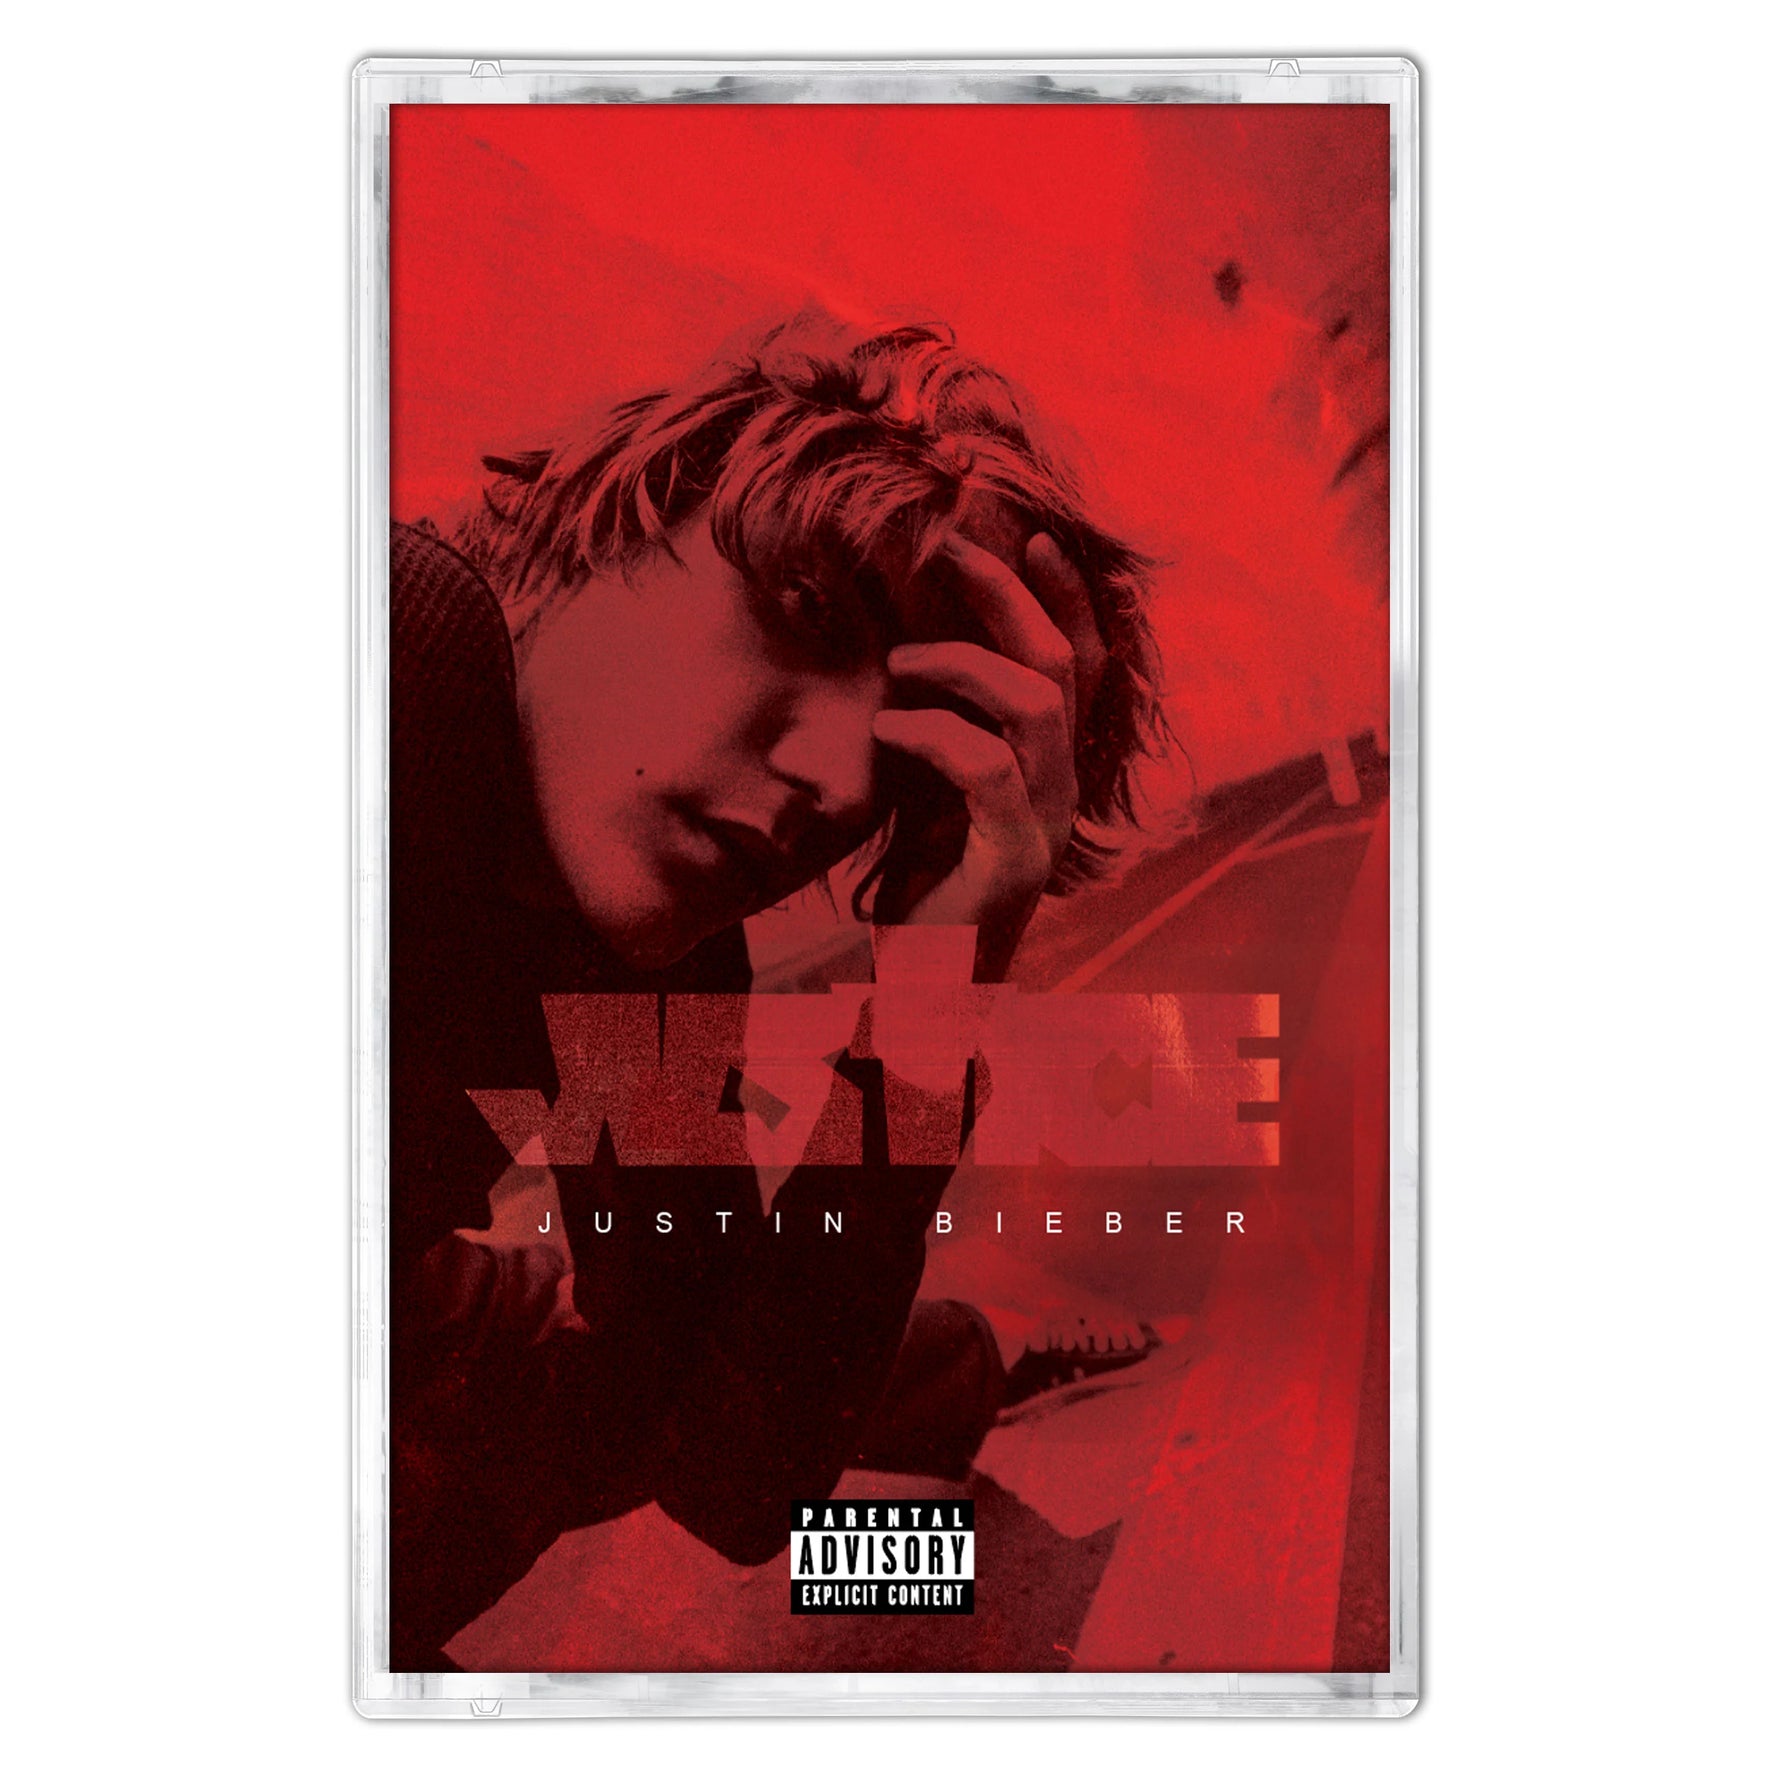 Justice (Store Exclusive Cassette #2)